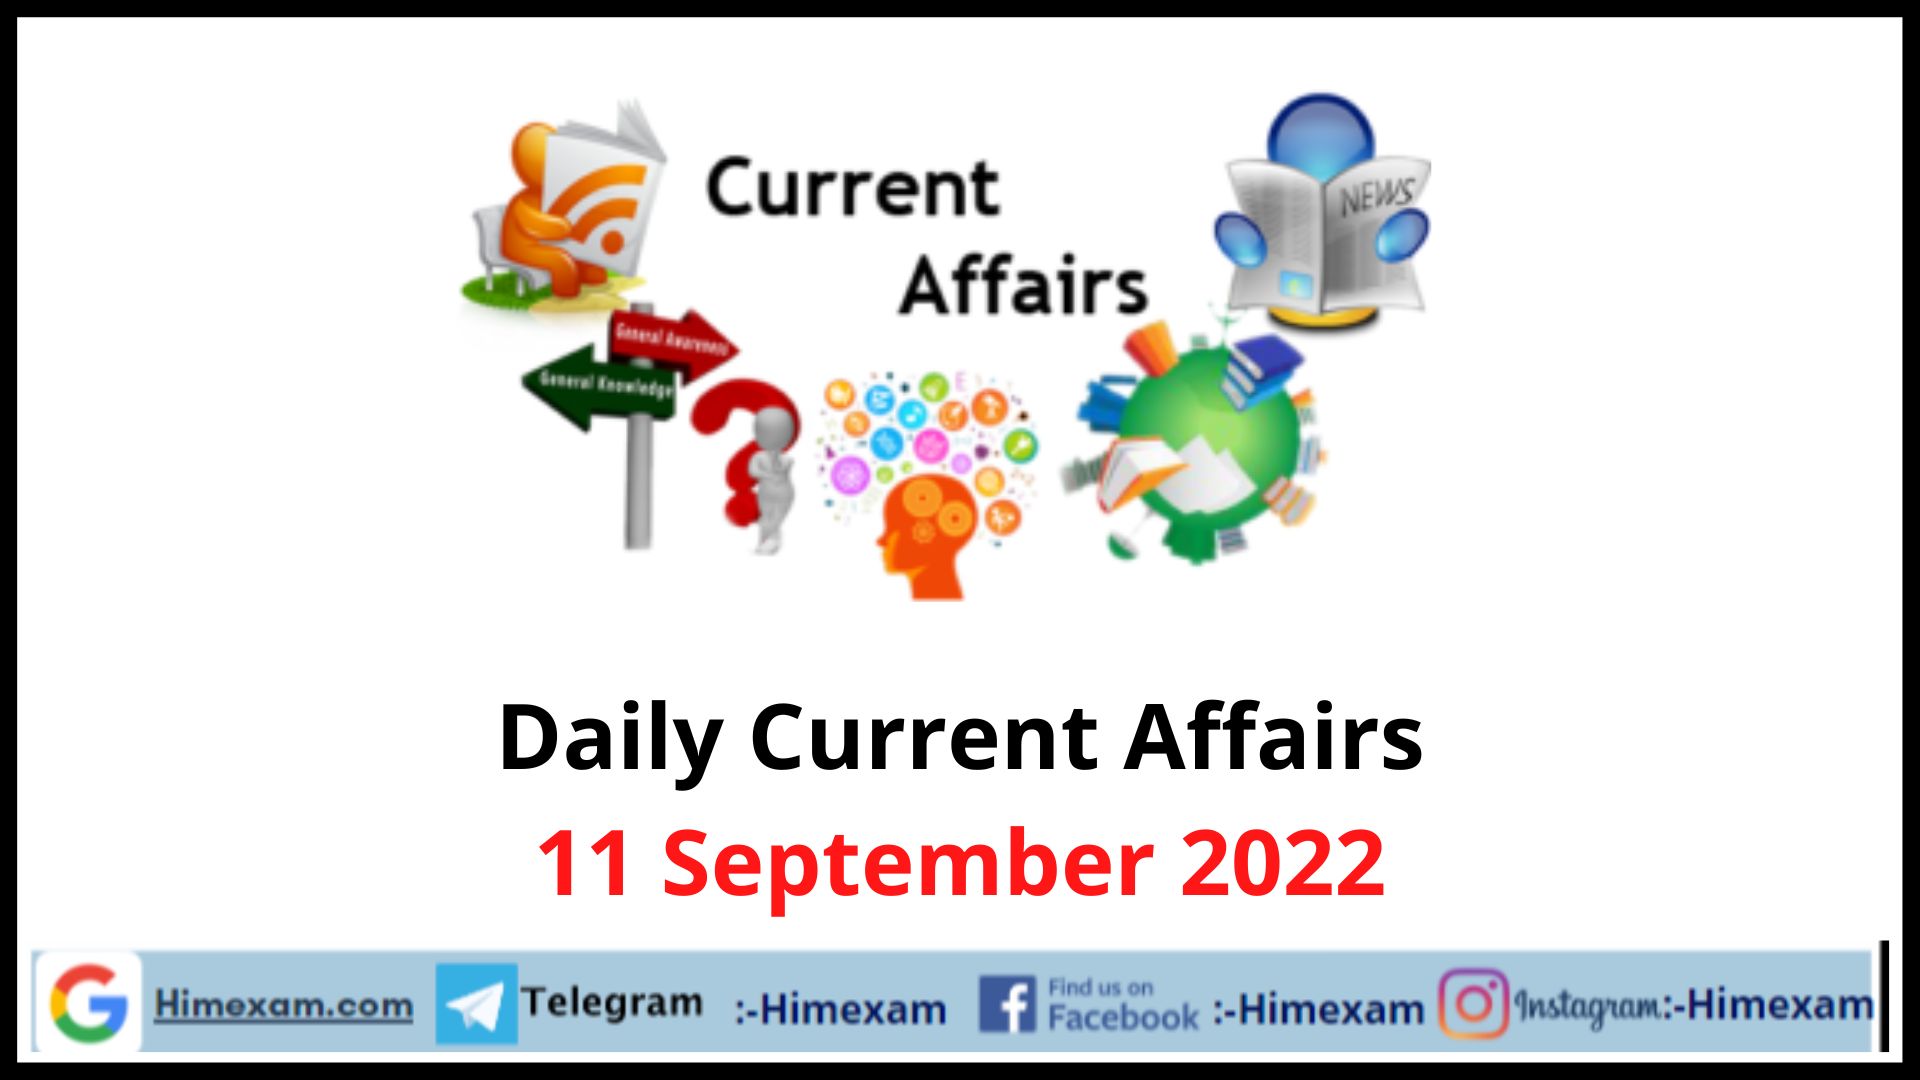 Daily Current Affairs 11 September 2022